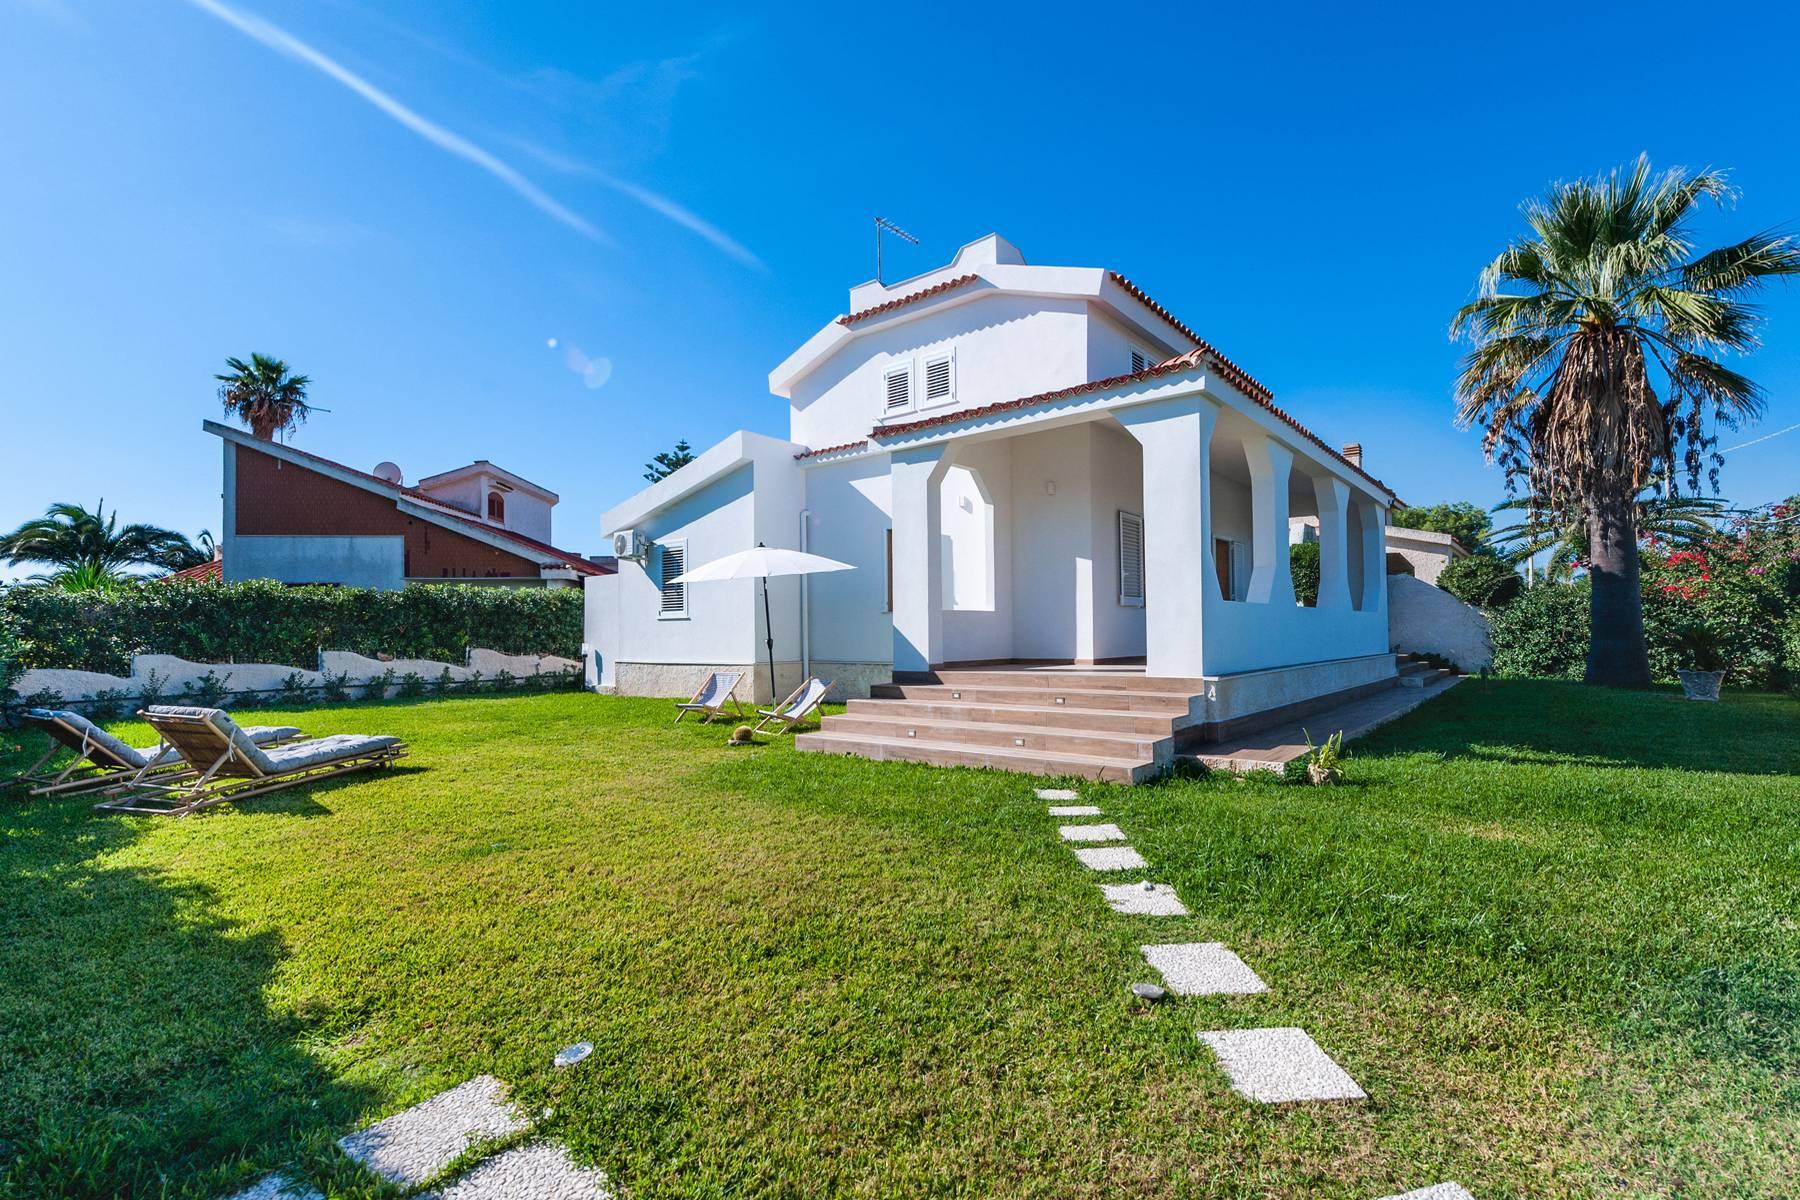 Villa in Plemmirio with direct access to the sea - 1